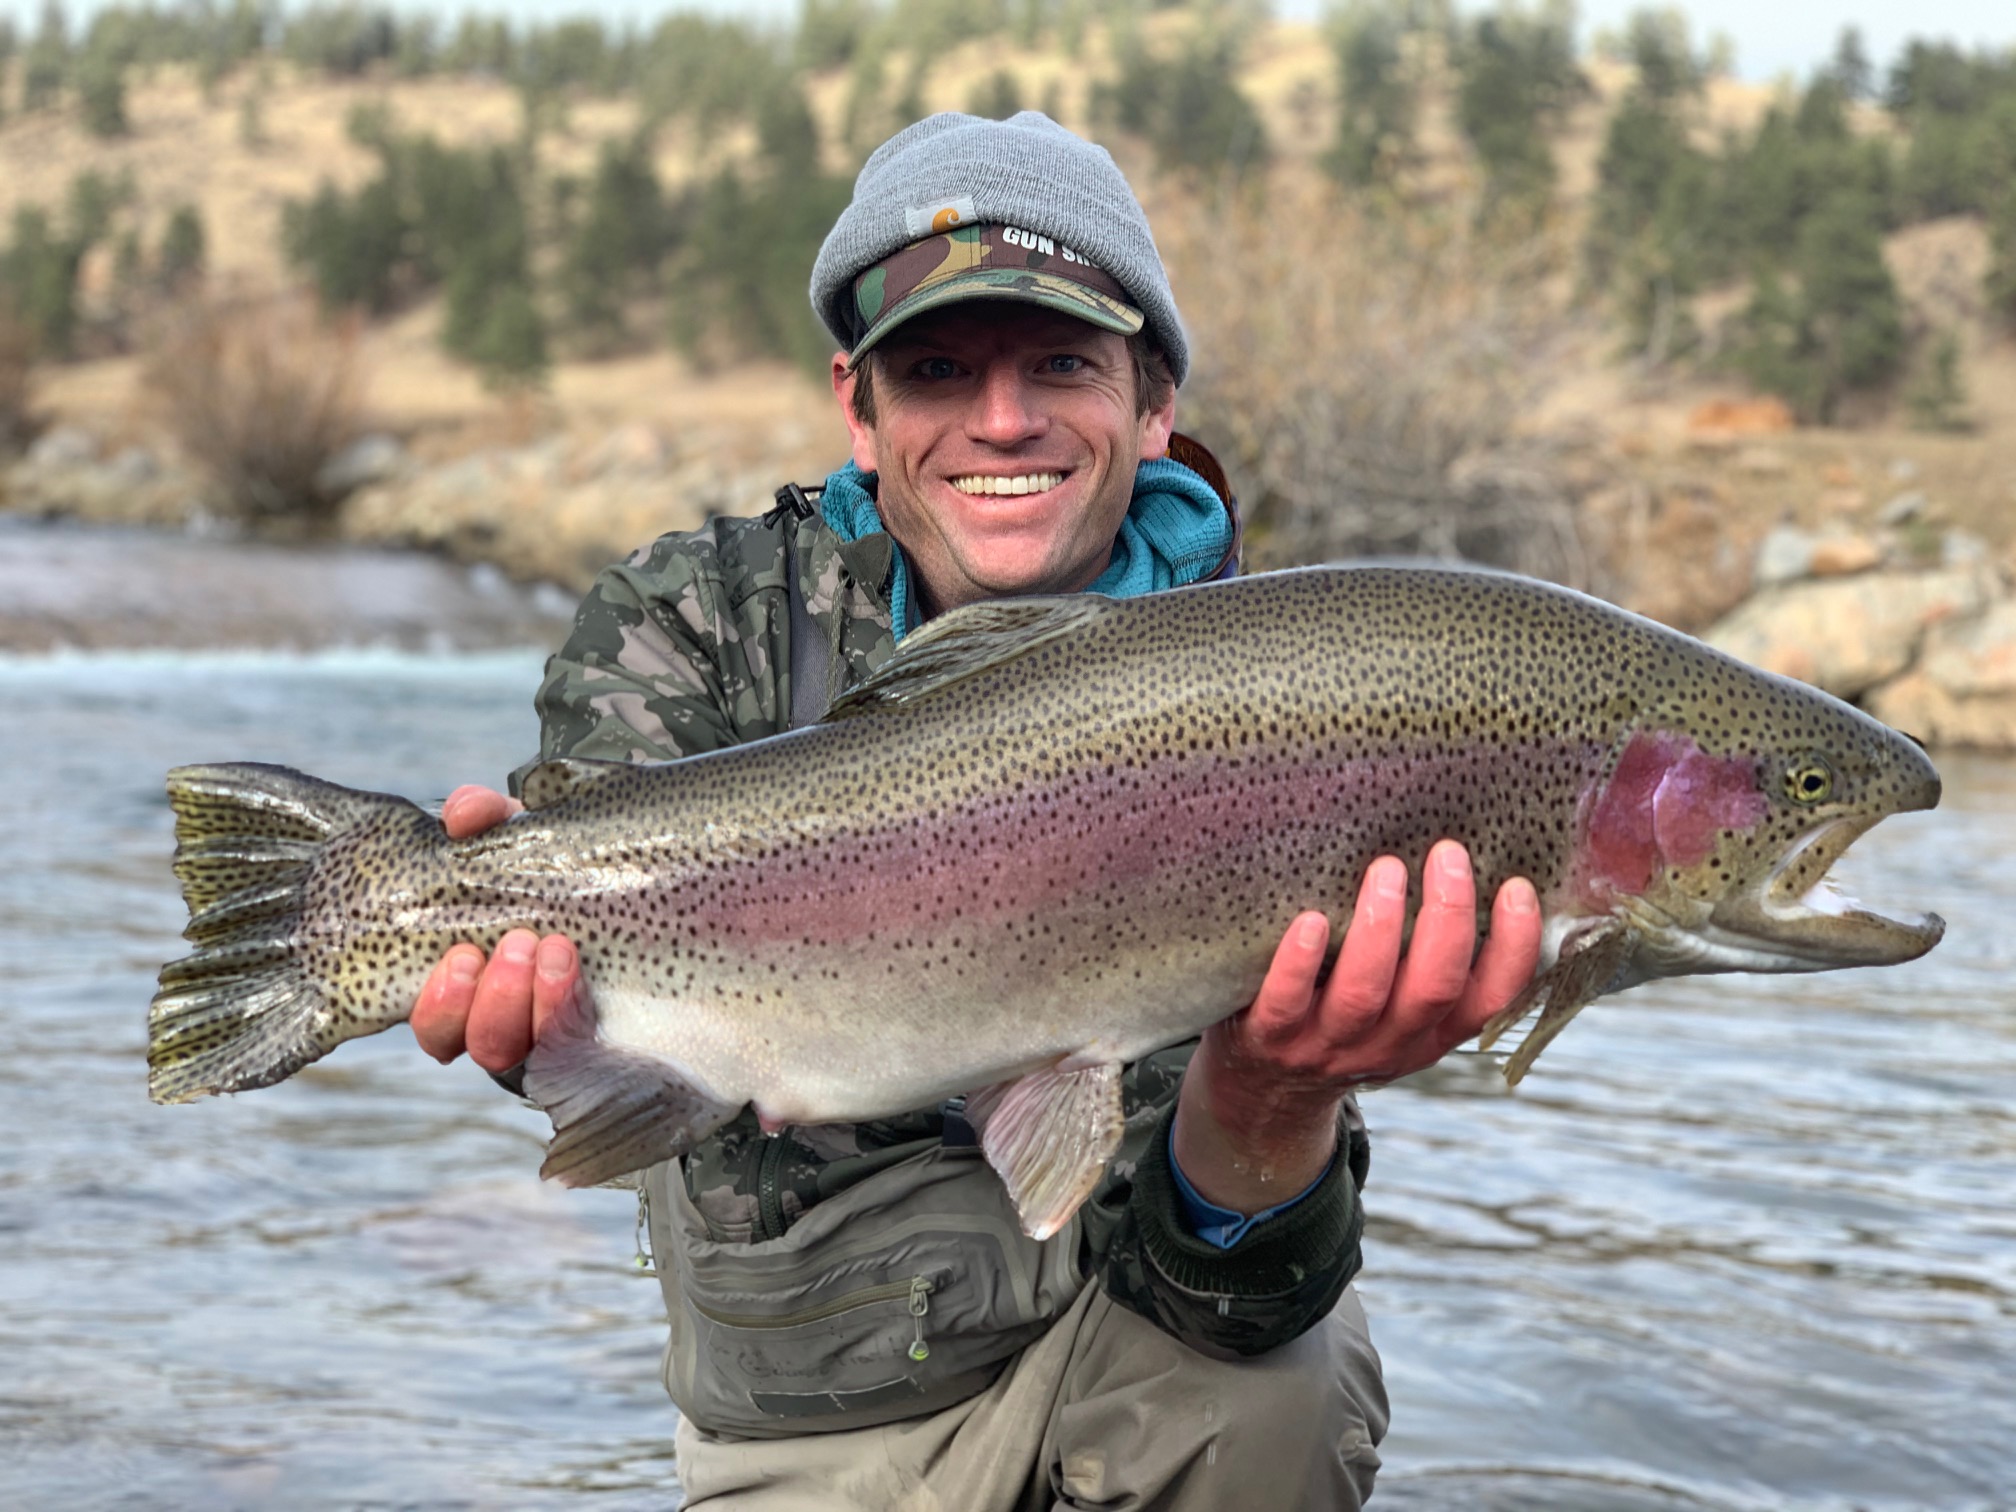 Huge trout from a private water guided fly fishing trip near Denver.